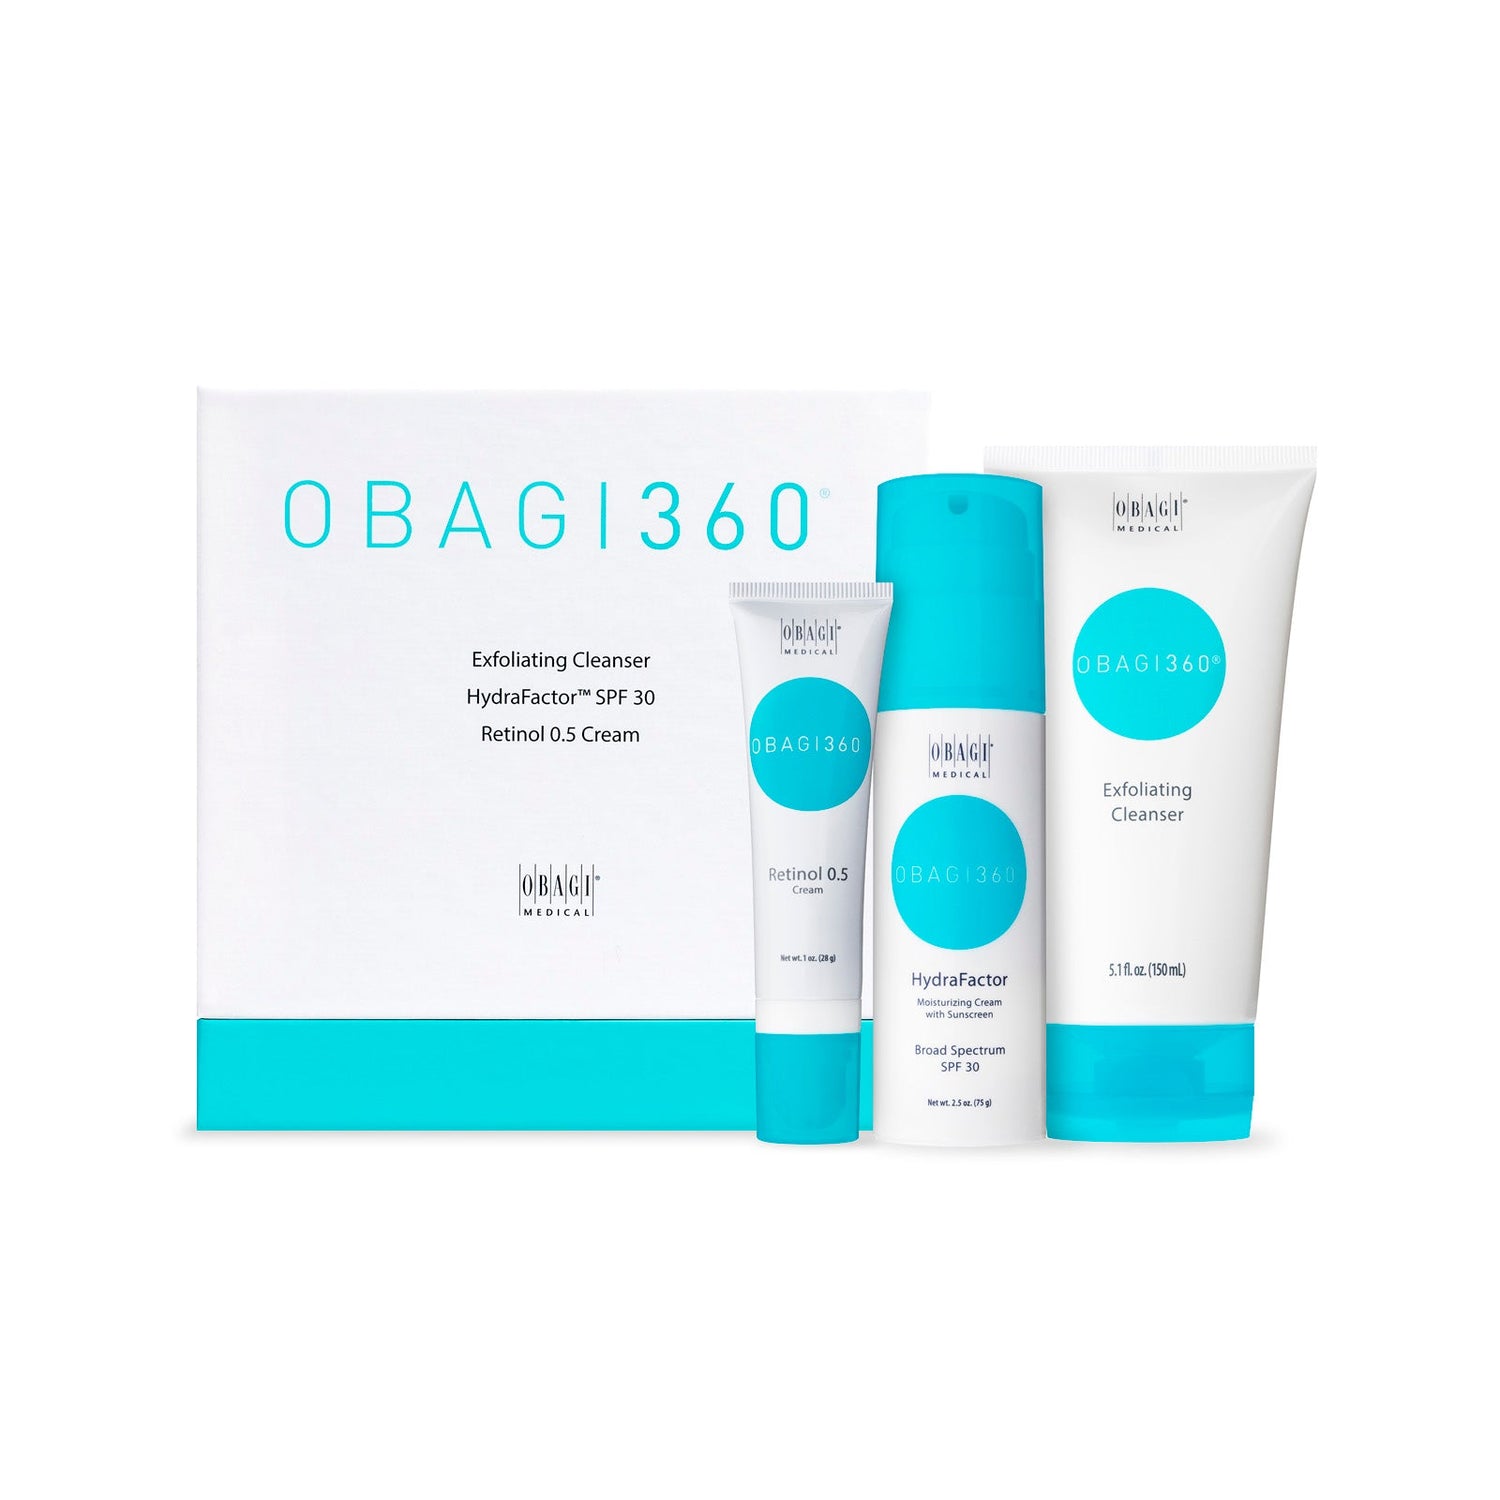 Obagi Medical Obagi360 System Kit (3 piece) - The Look and Co